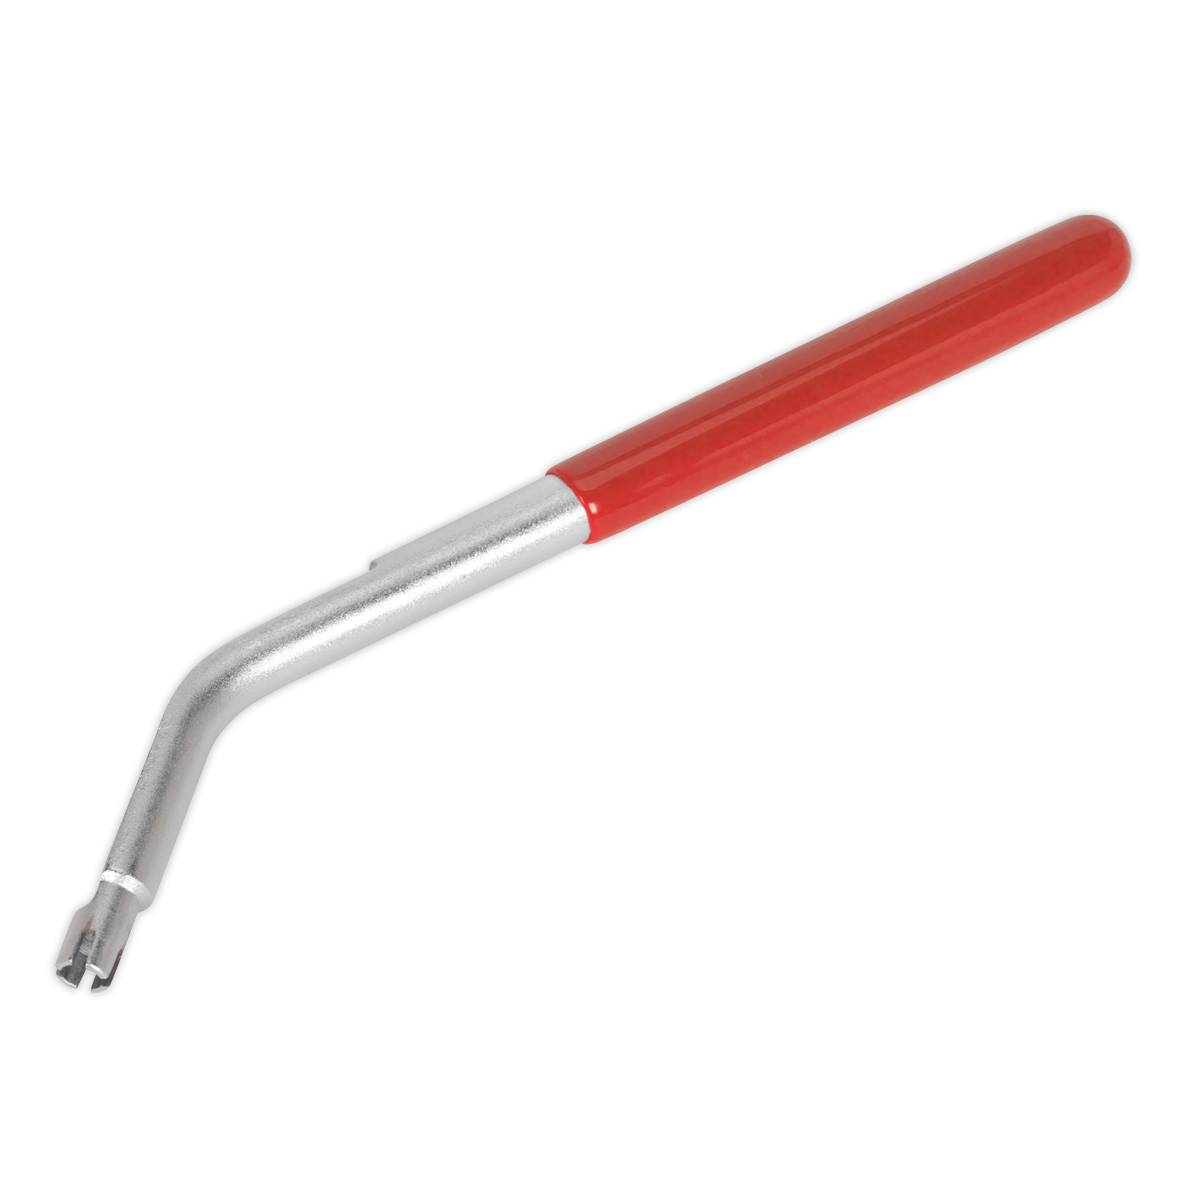 Sealey Washer Jet Tool - Vauxhall/Opel